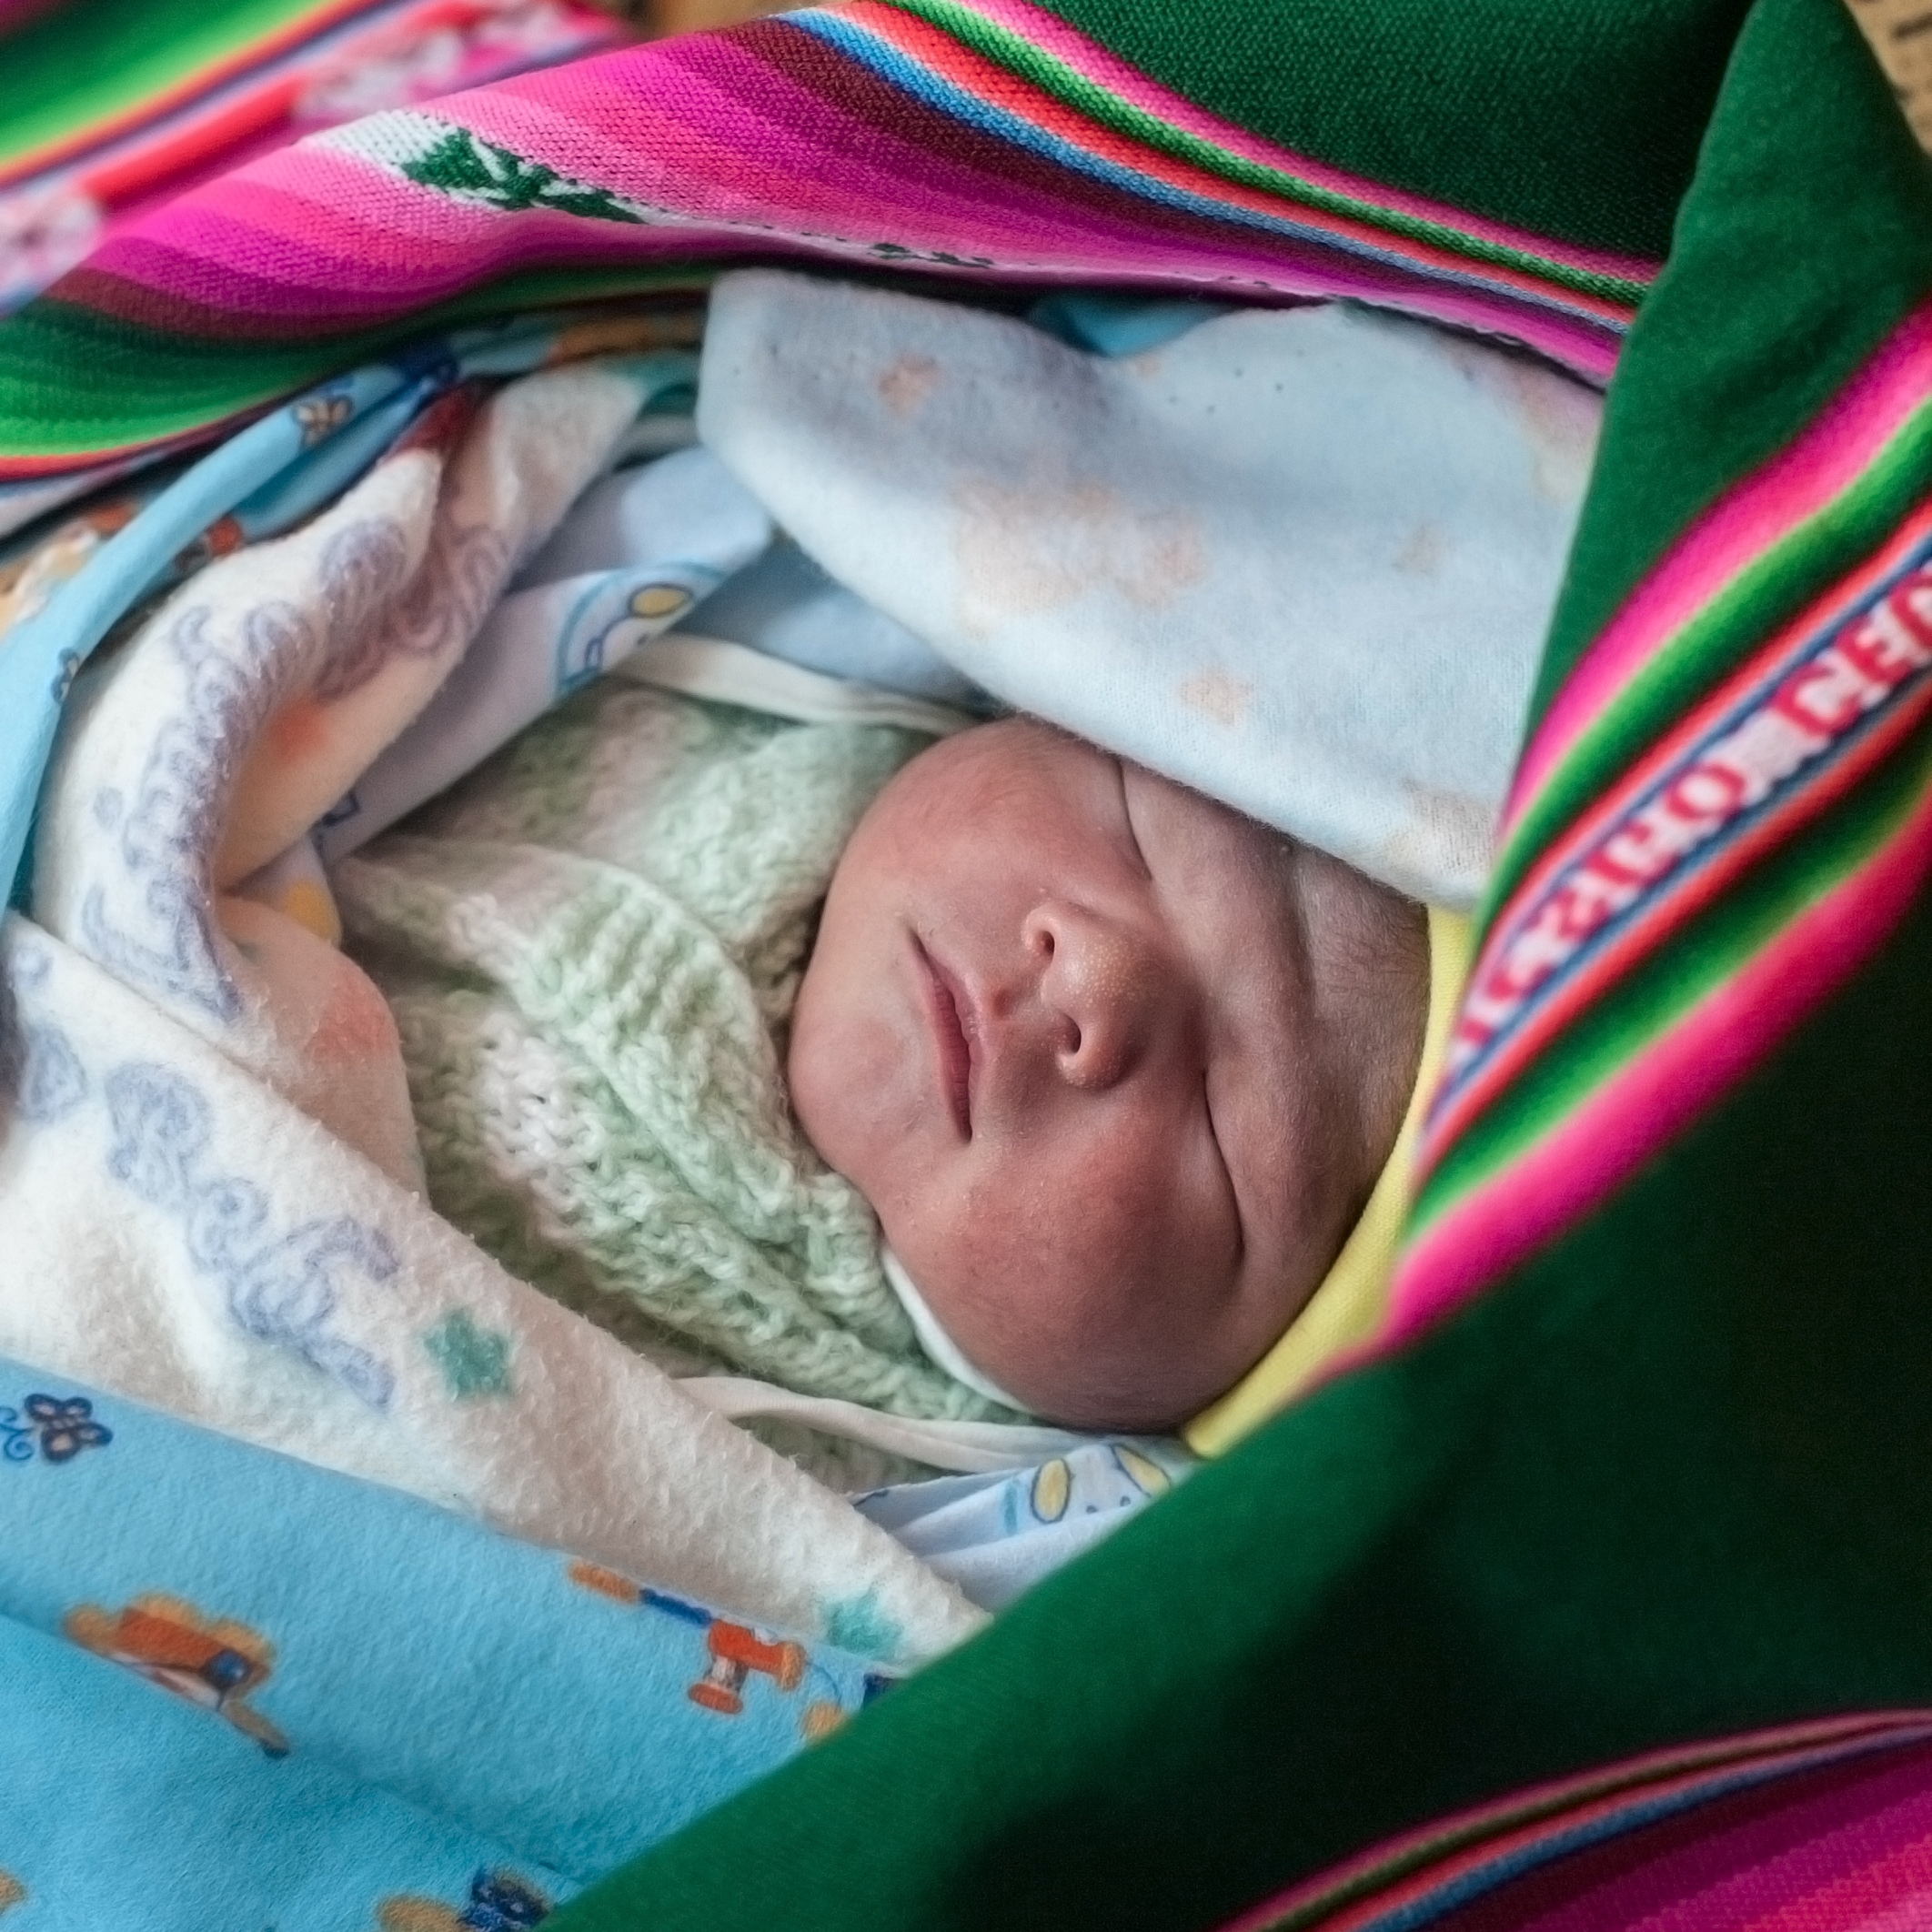 Baby Emanuel, just 1 day old, is healthy and wrapped in a colorful “aguayo” blanket made from llama wool.